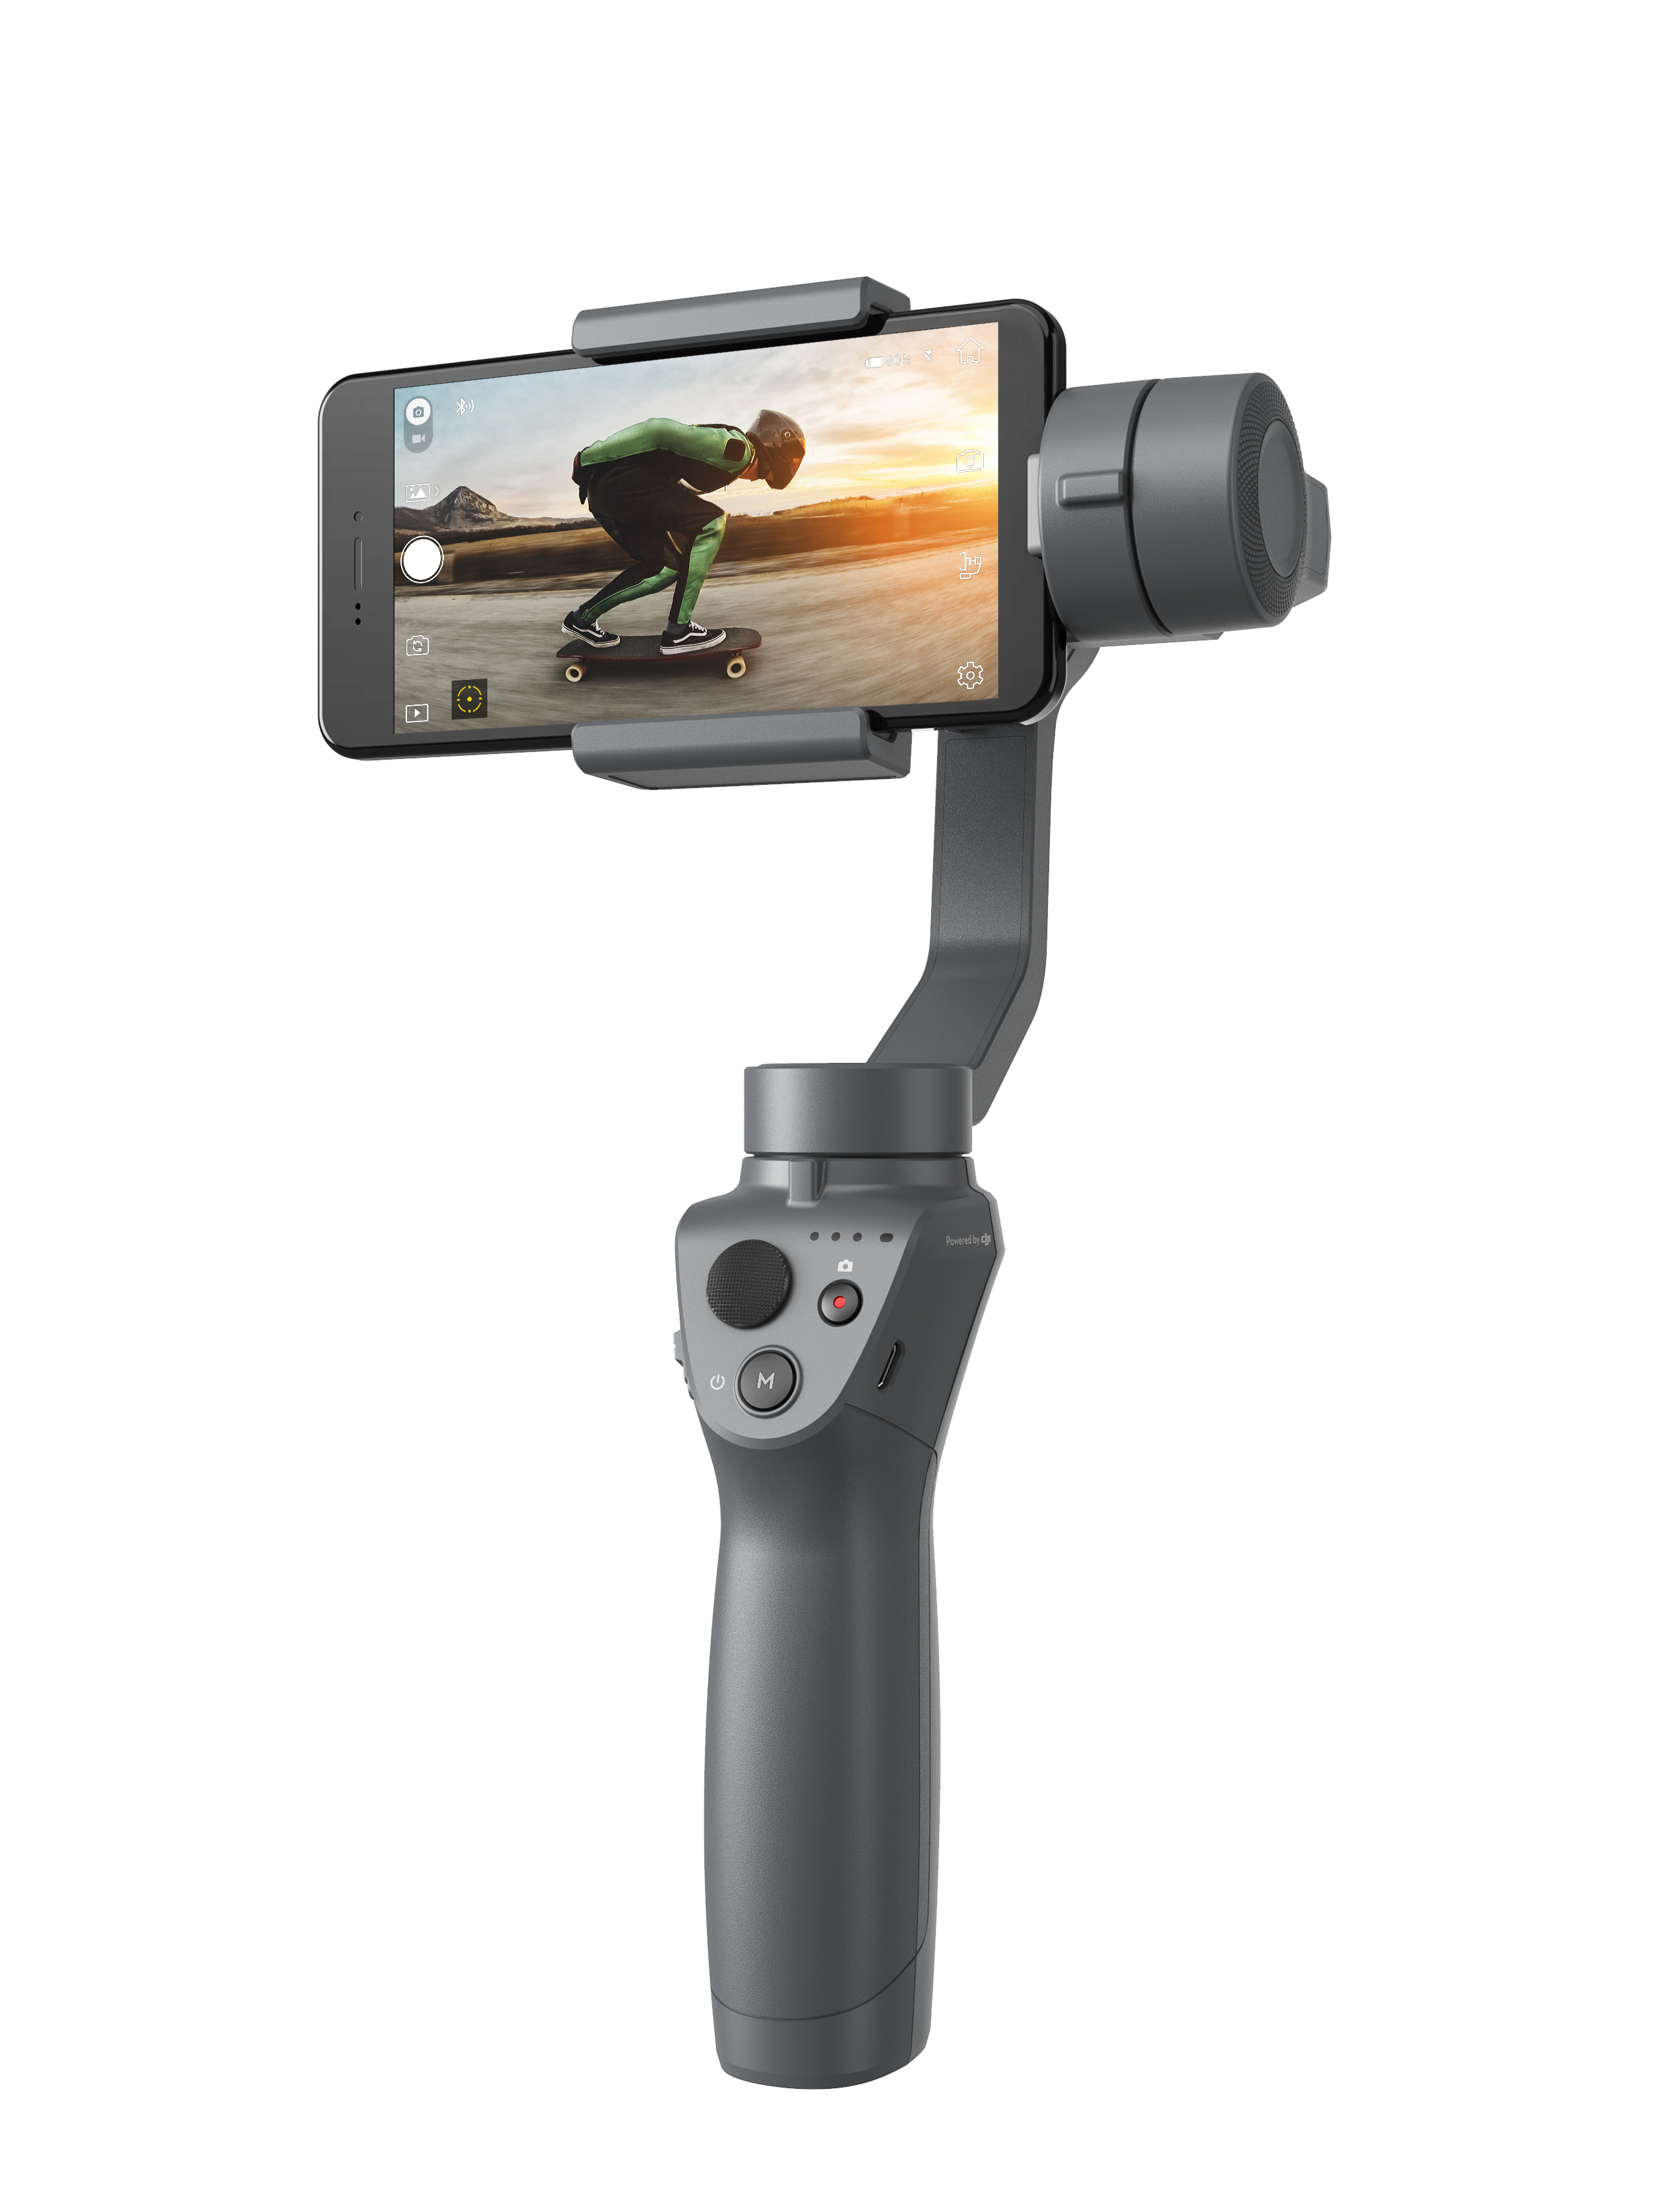 DJI Reveals New Handheld Camera Stabilizers At CES 2018